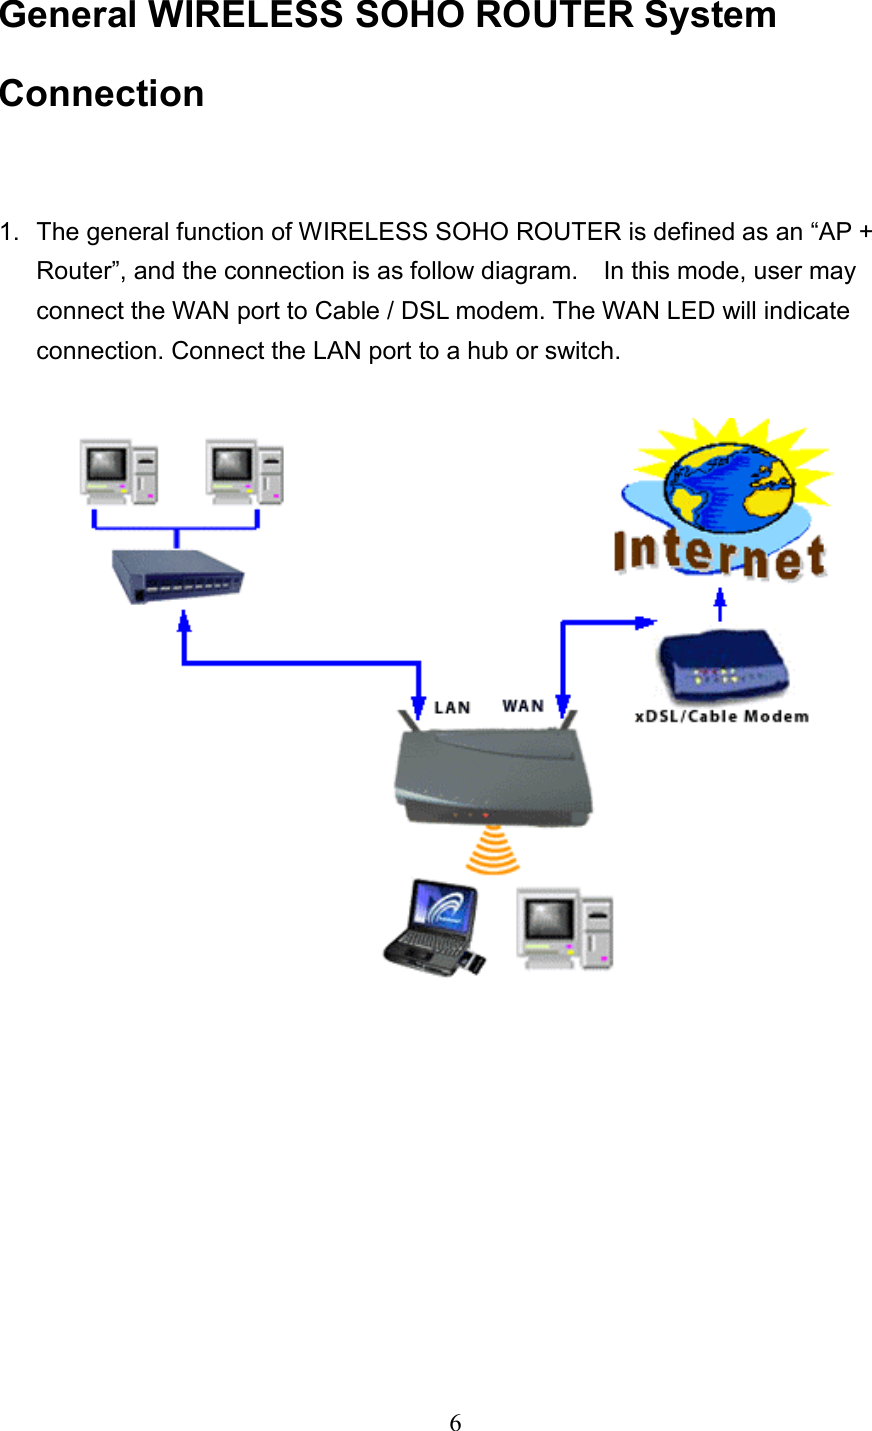  6  General WIRELESS SOHO ROUTER System Connection  1.  The general function of WIRELESS SOHO ROUTER is defined as an “AP + Router”, and the connection is as follow diagram.    In this mode, user may connect the WAN port to Cable / DSL modem. The WAN LED will indicate connection. Connect the LAN port to a hub or switch.          